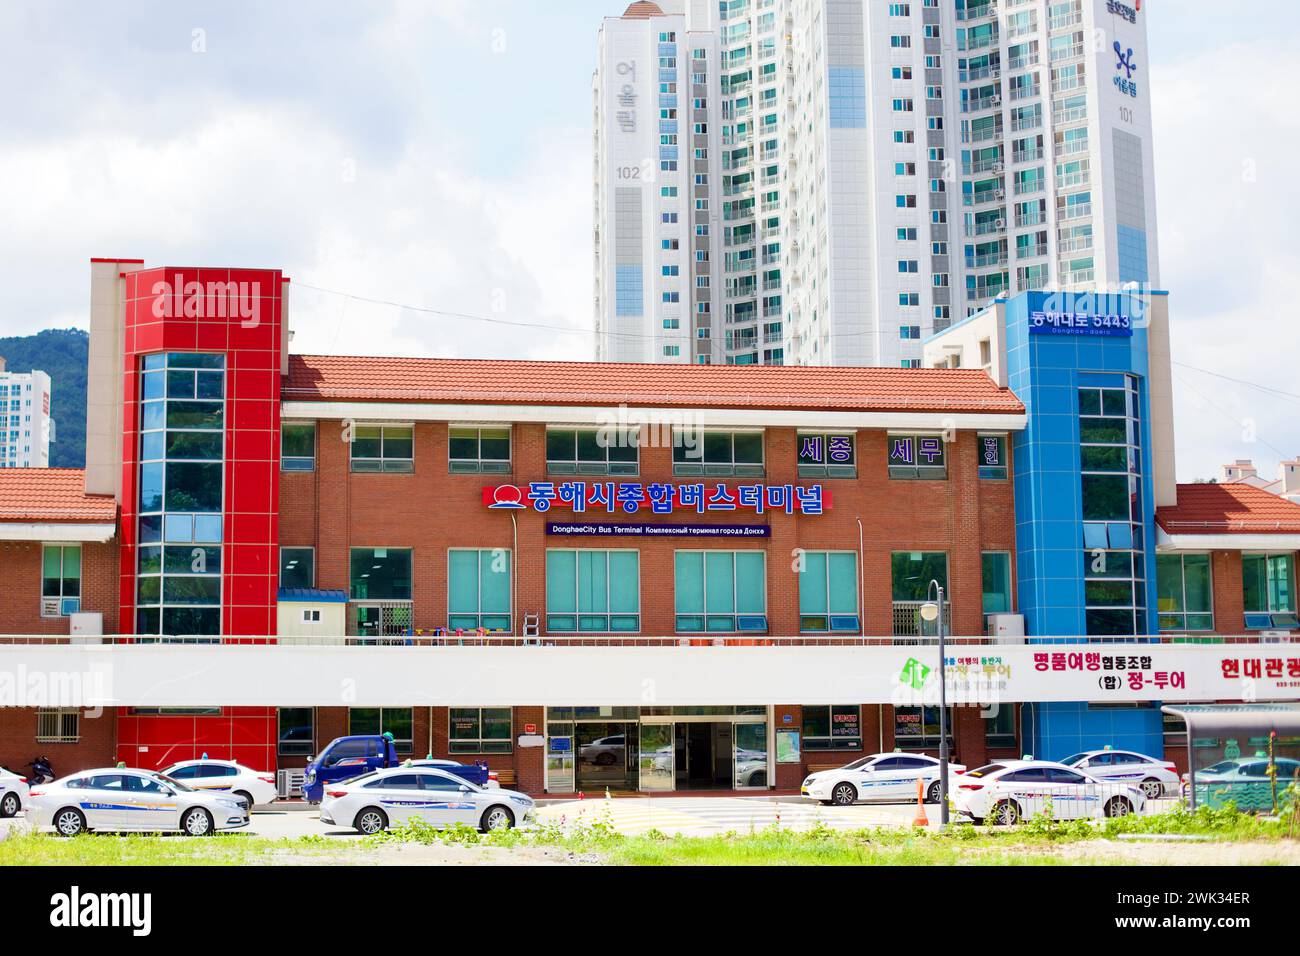 Donghae City, South Korea - July 28th, 2019: The brick facade of Donghae City's Intercity Bus Terminal stands prominently, with a high-rise apartment Stock Photo